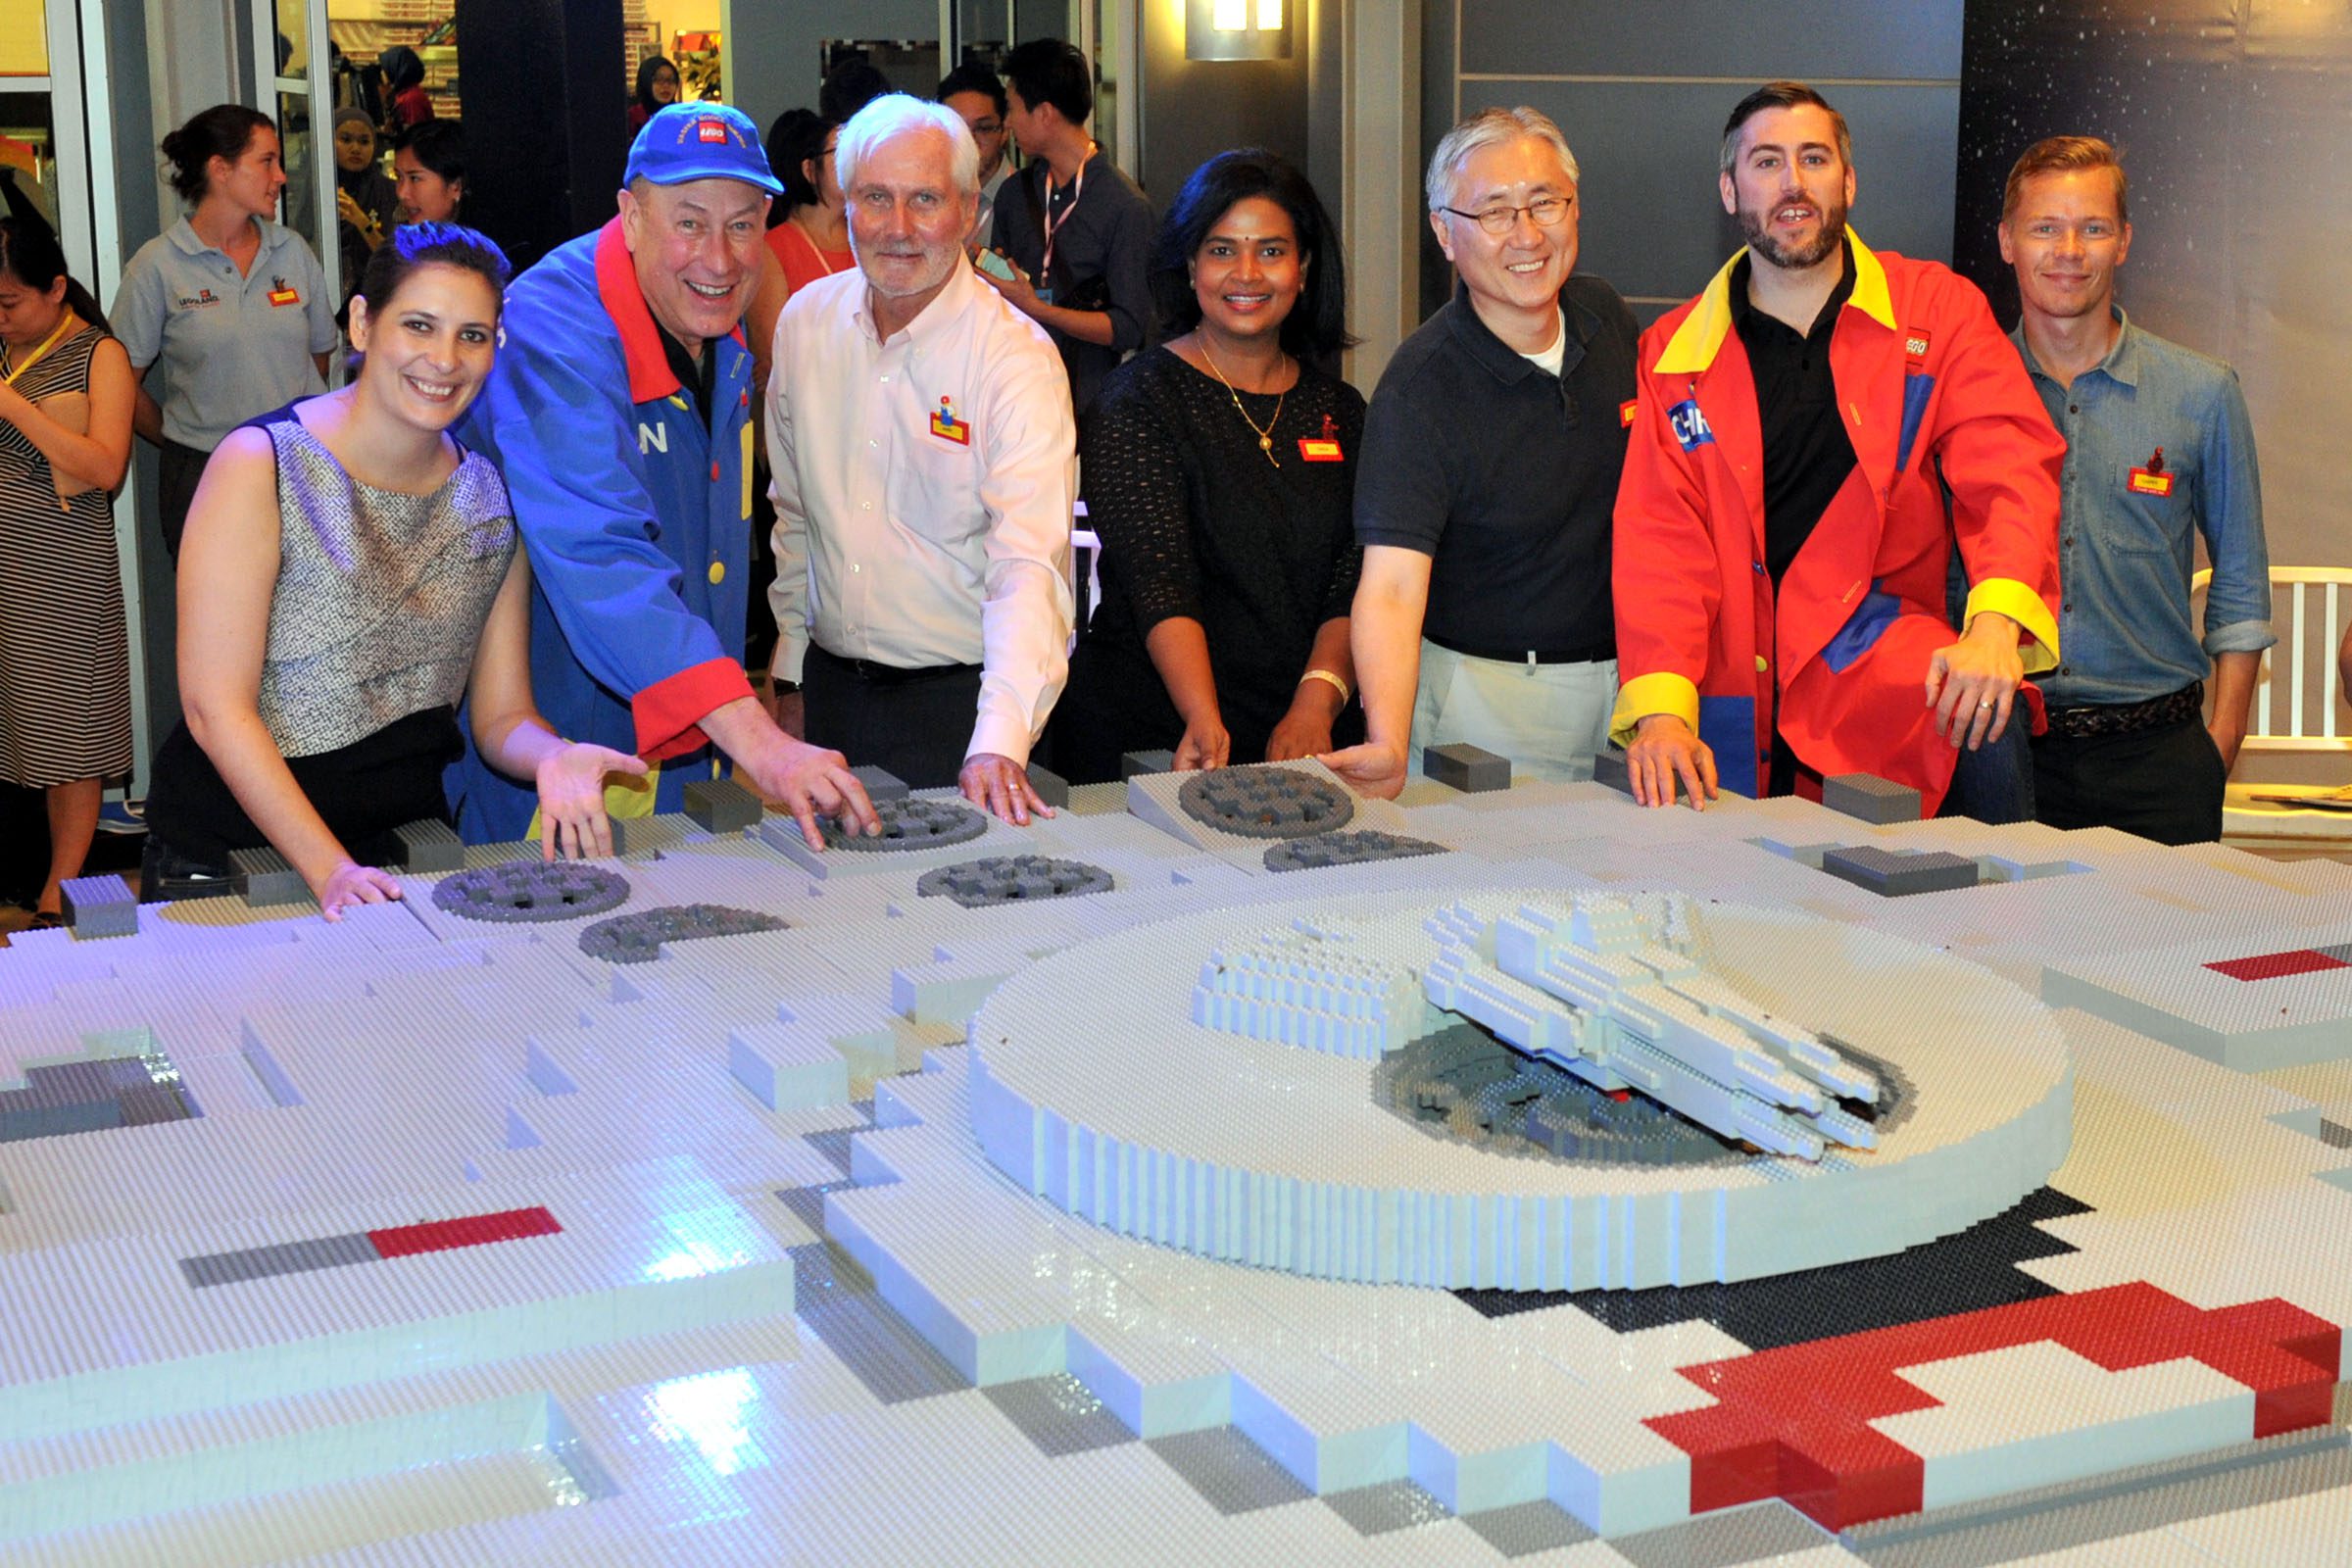 Our VIPs with the completed Millennium Falcon. (Legoland Malaysia)